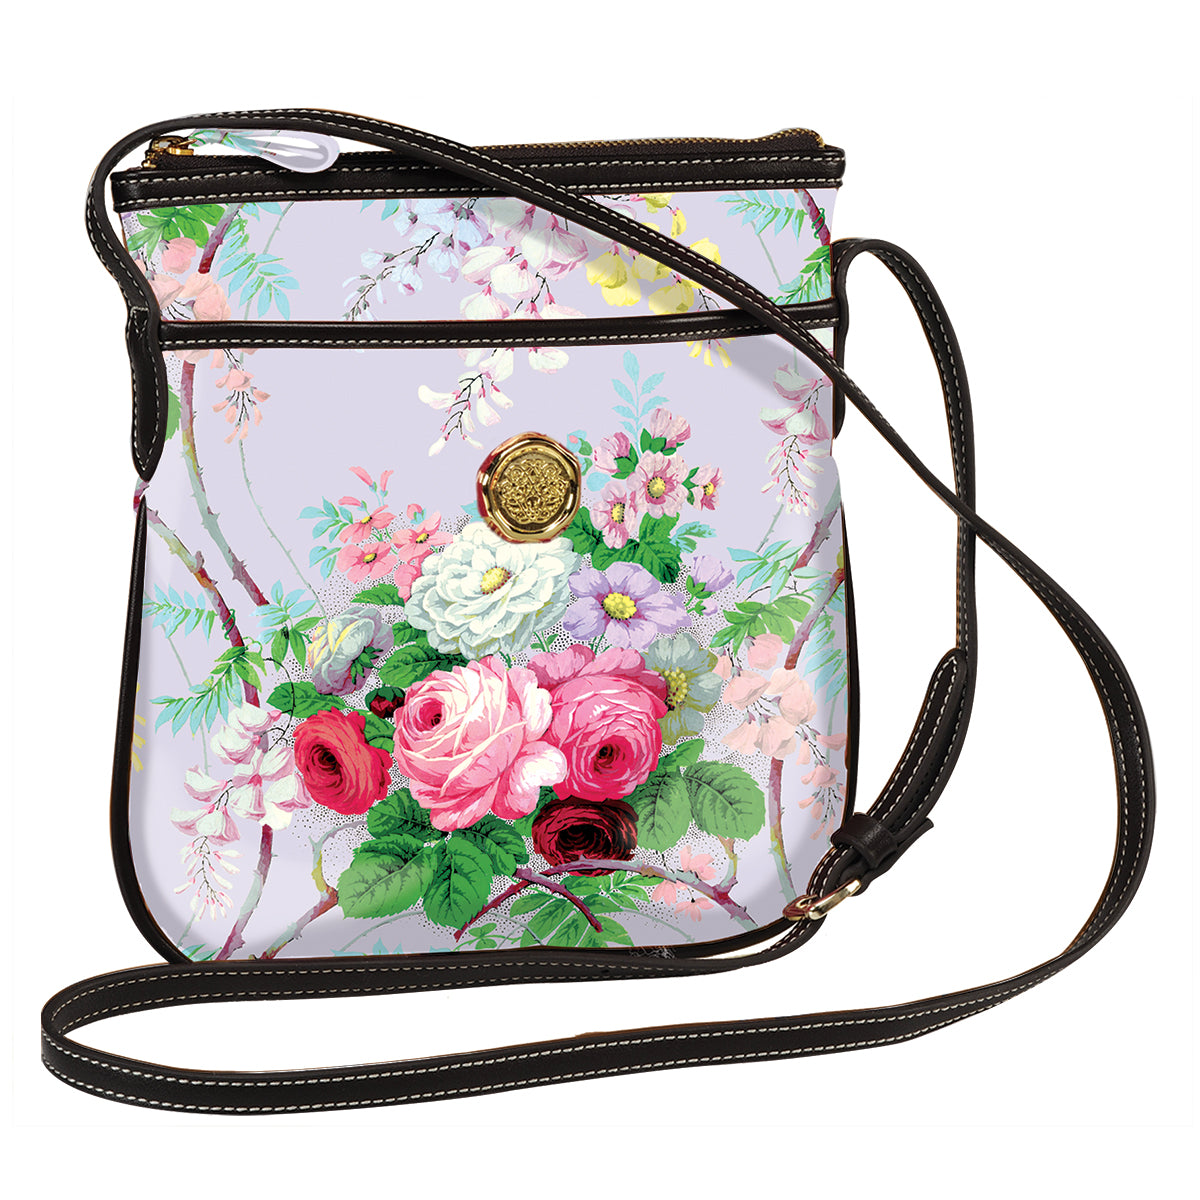 a purse with flowers painted on it.